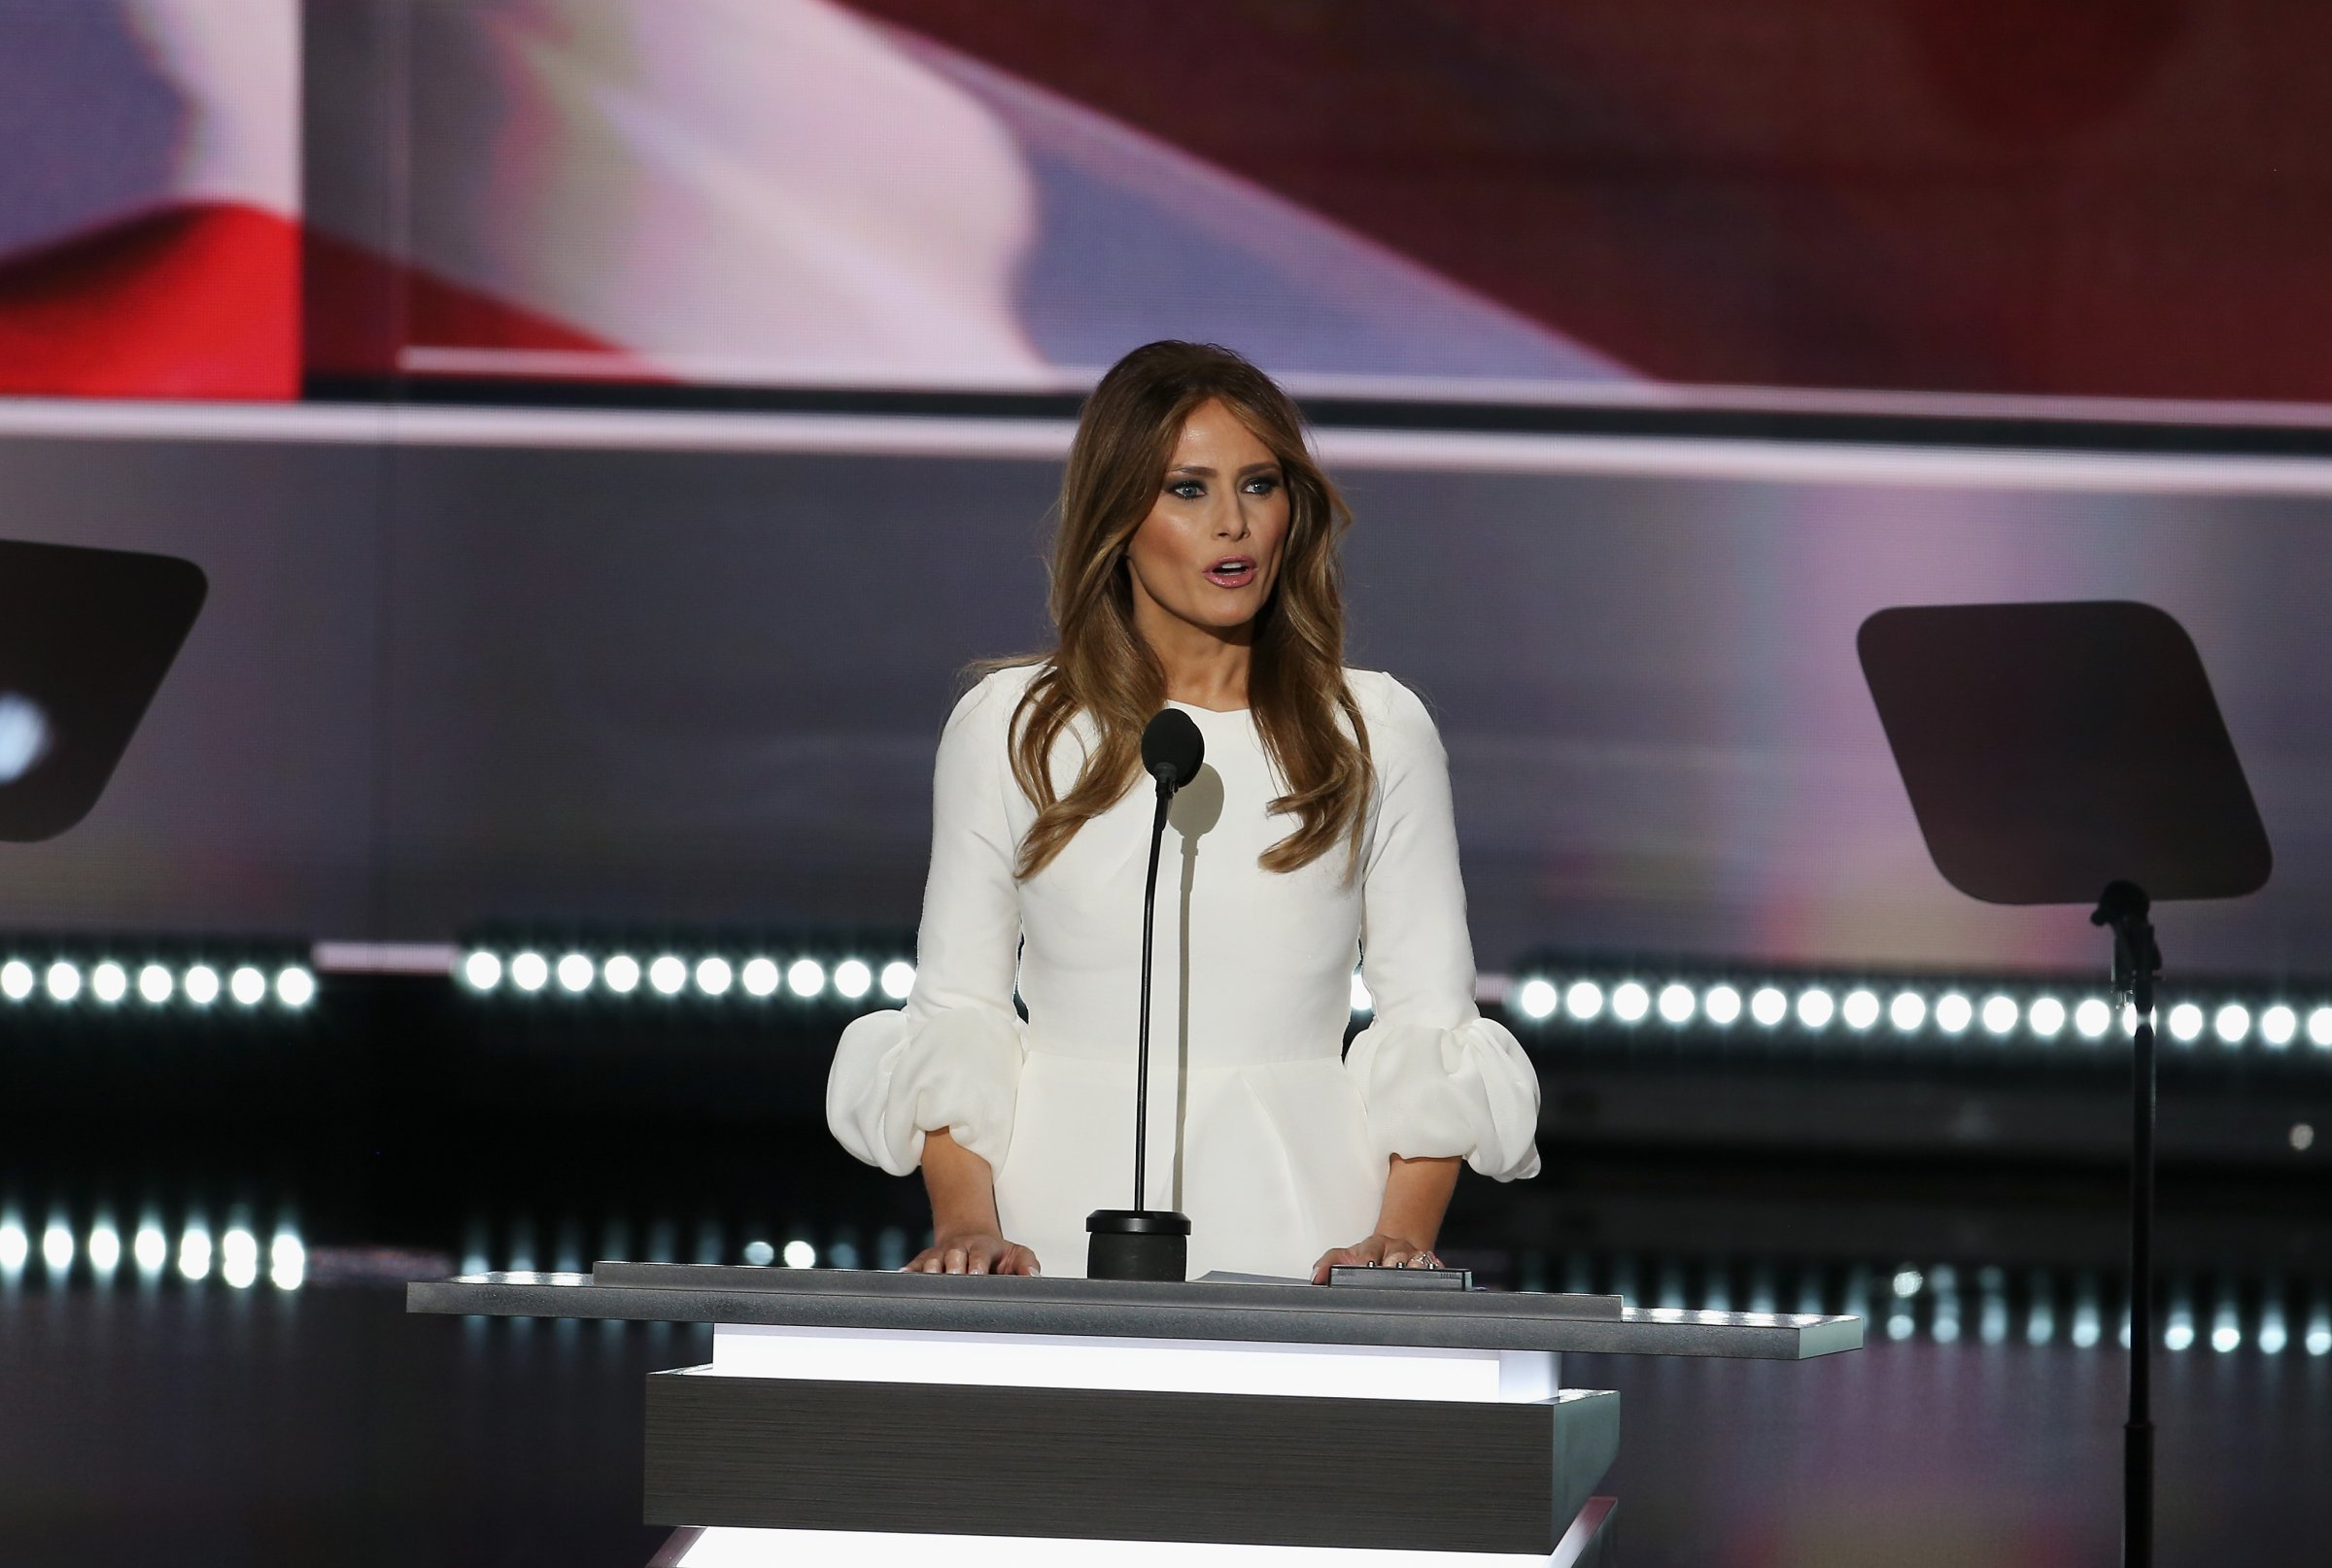 Businesswoman and wife of republican presidential candidate Donald Trump, Melania Trump walks on stage during the Republican National Convention at Quicken Loans Arena on July 18, 2016 in Cleveland, Ohio.